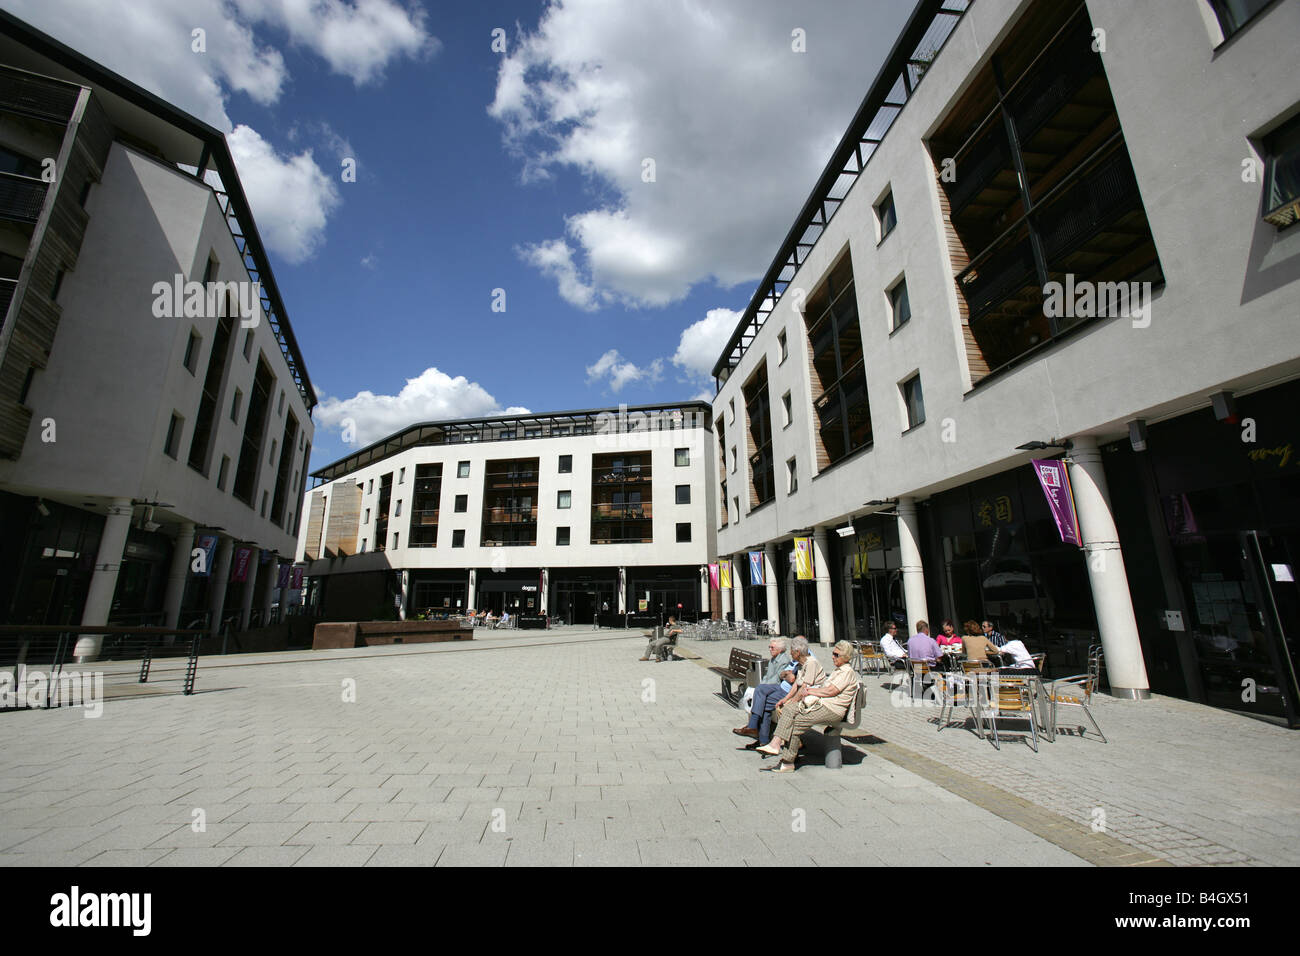 City of Coventry, England. Coventry Phoenix Initiative at Priory Place contains restaurants, cafes and residential apartments. Stock Photo